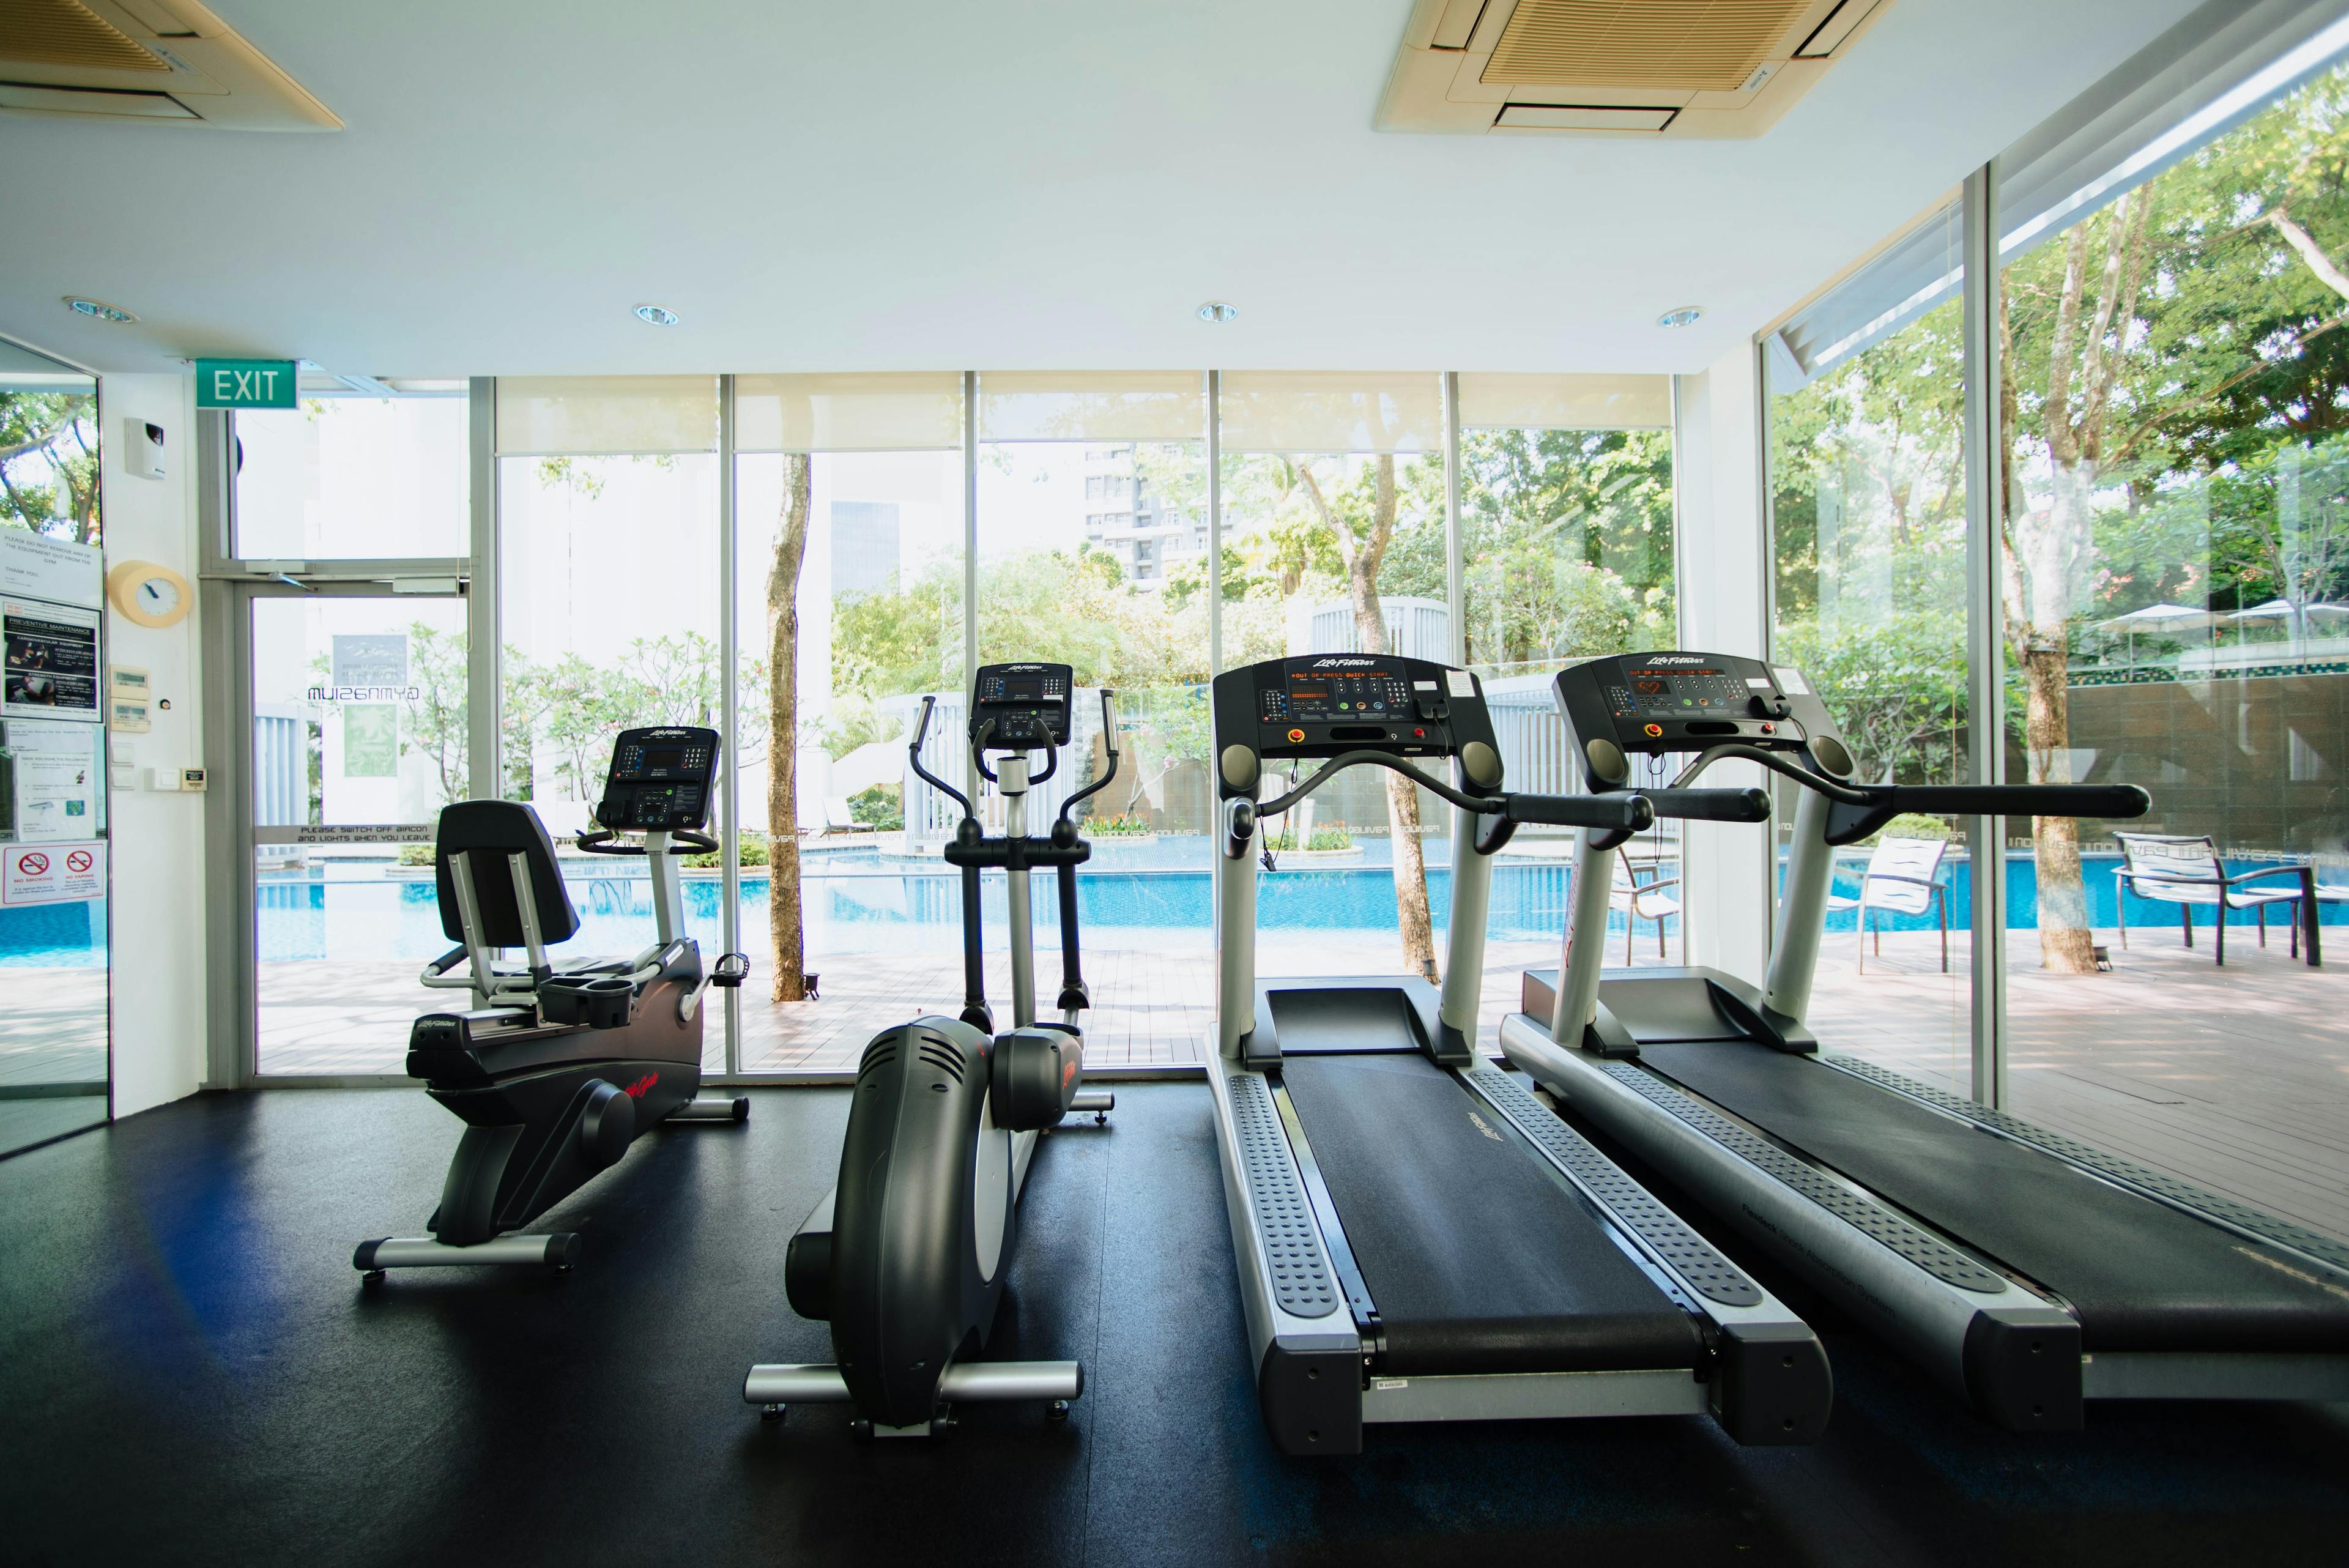 Photo of various gym equipment including a tread mill and elliptical machine